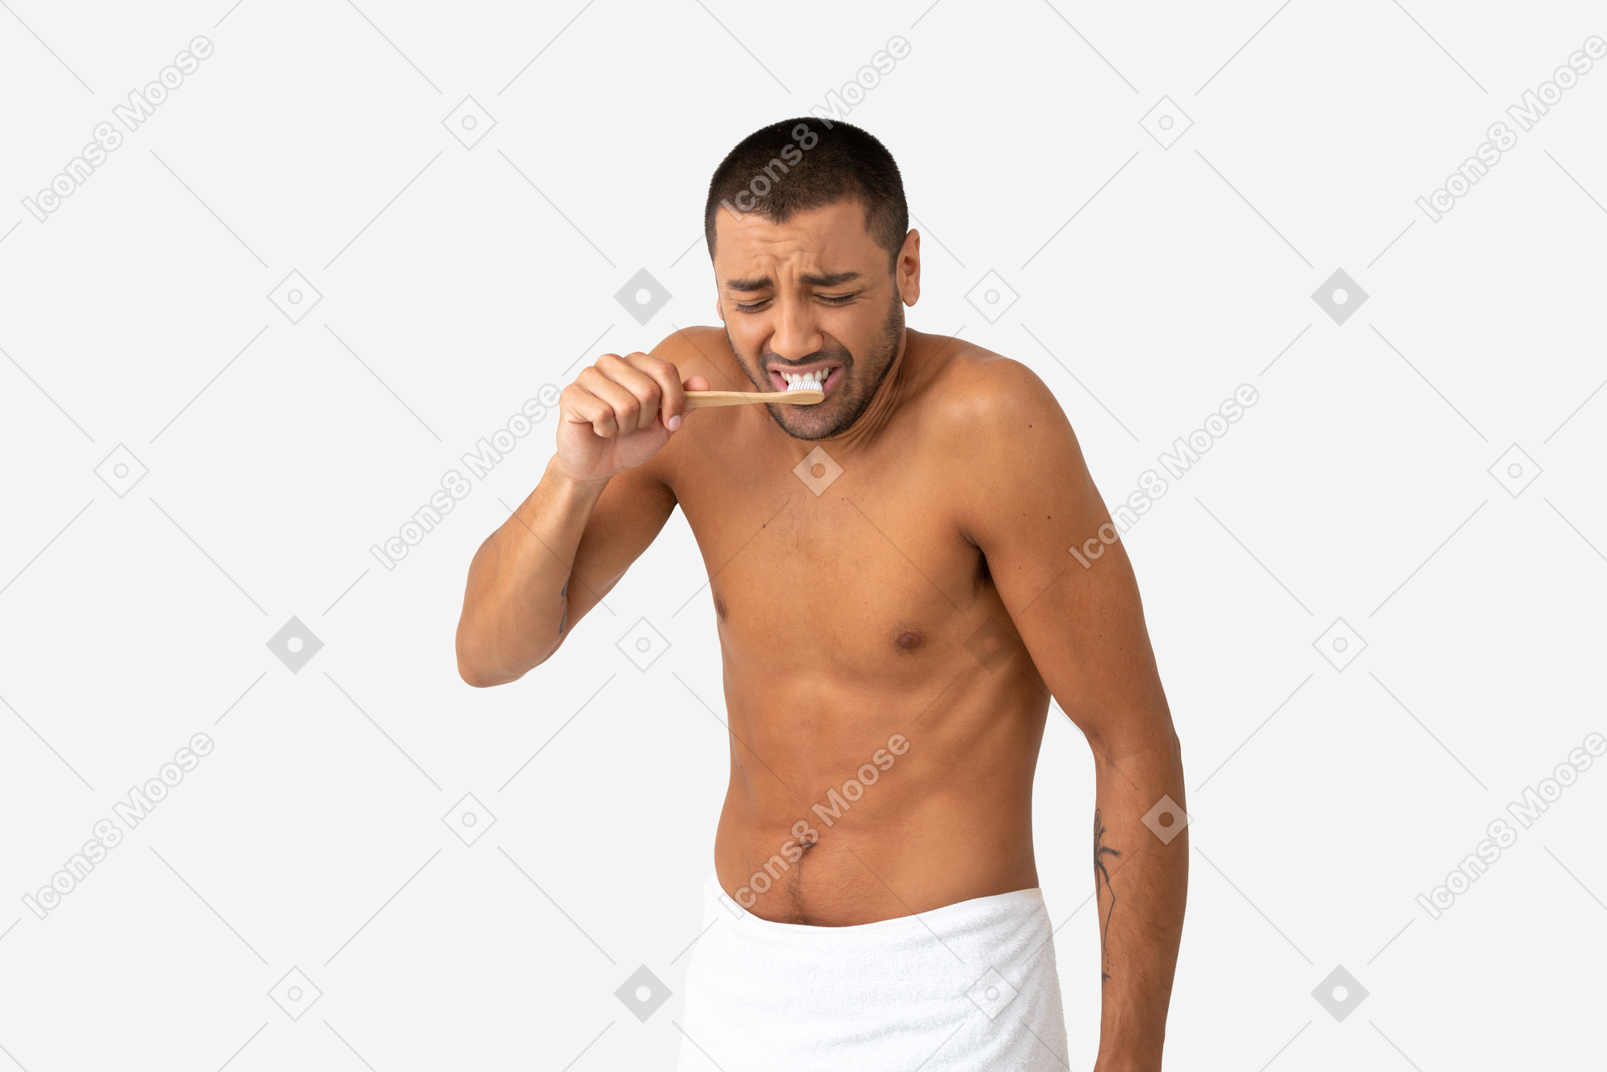 Barechested young man brushing his teeth with disgusted expression